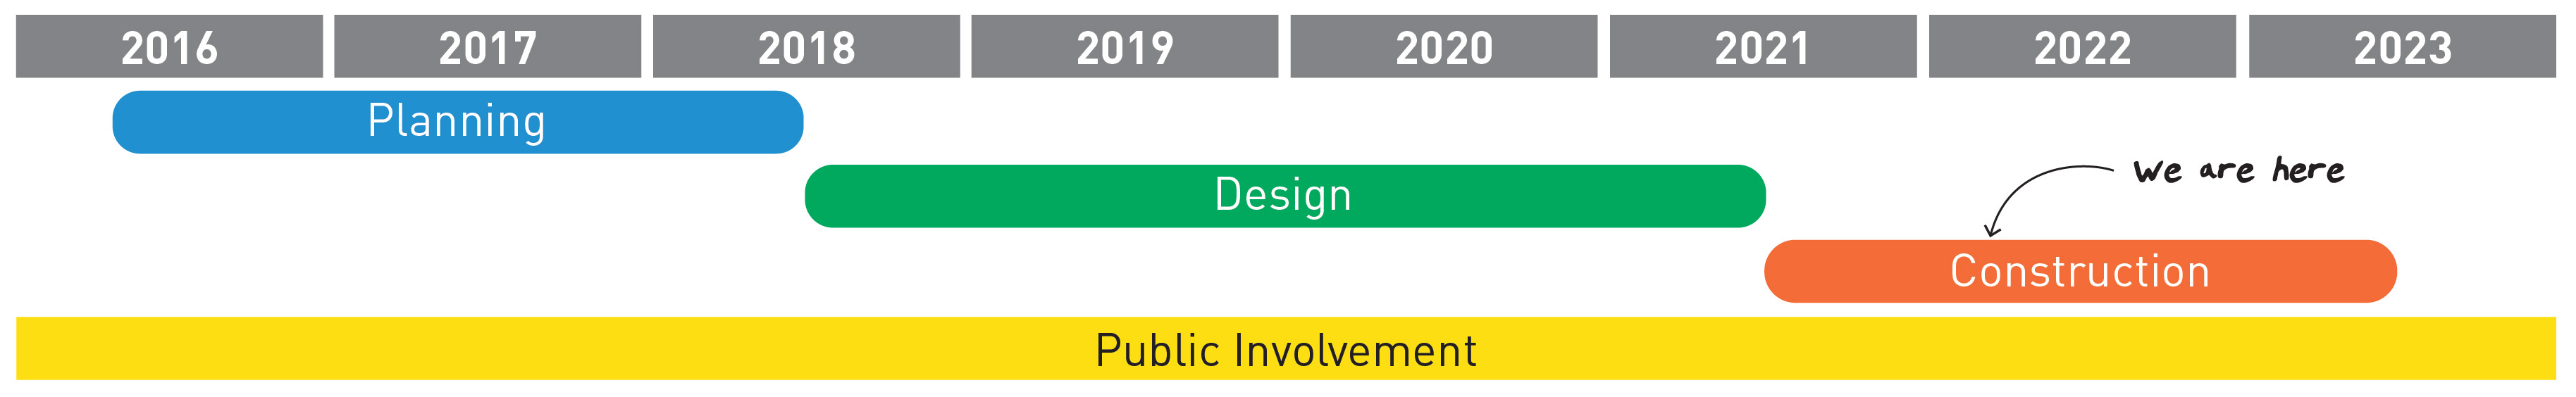 Project schedule graphic showing planning phase from early 2016 to late 2018, design phase from late 2018 to late 2021, and construction phase from late 2021 to late 2022.